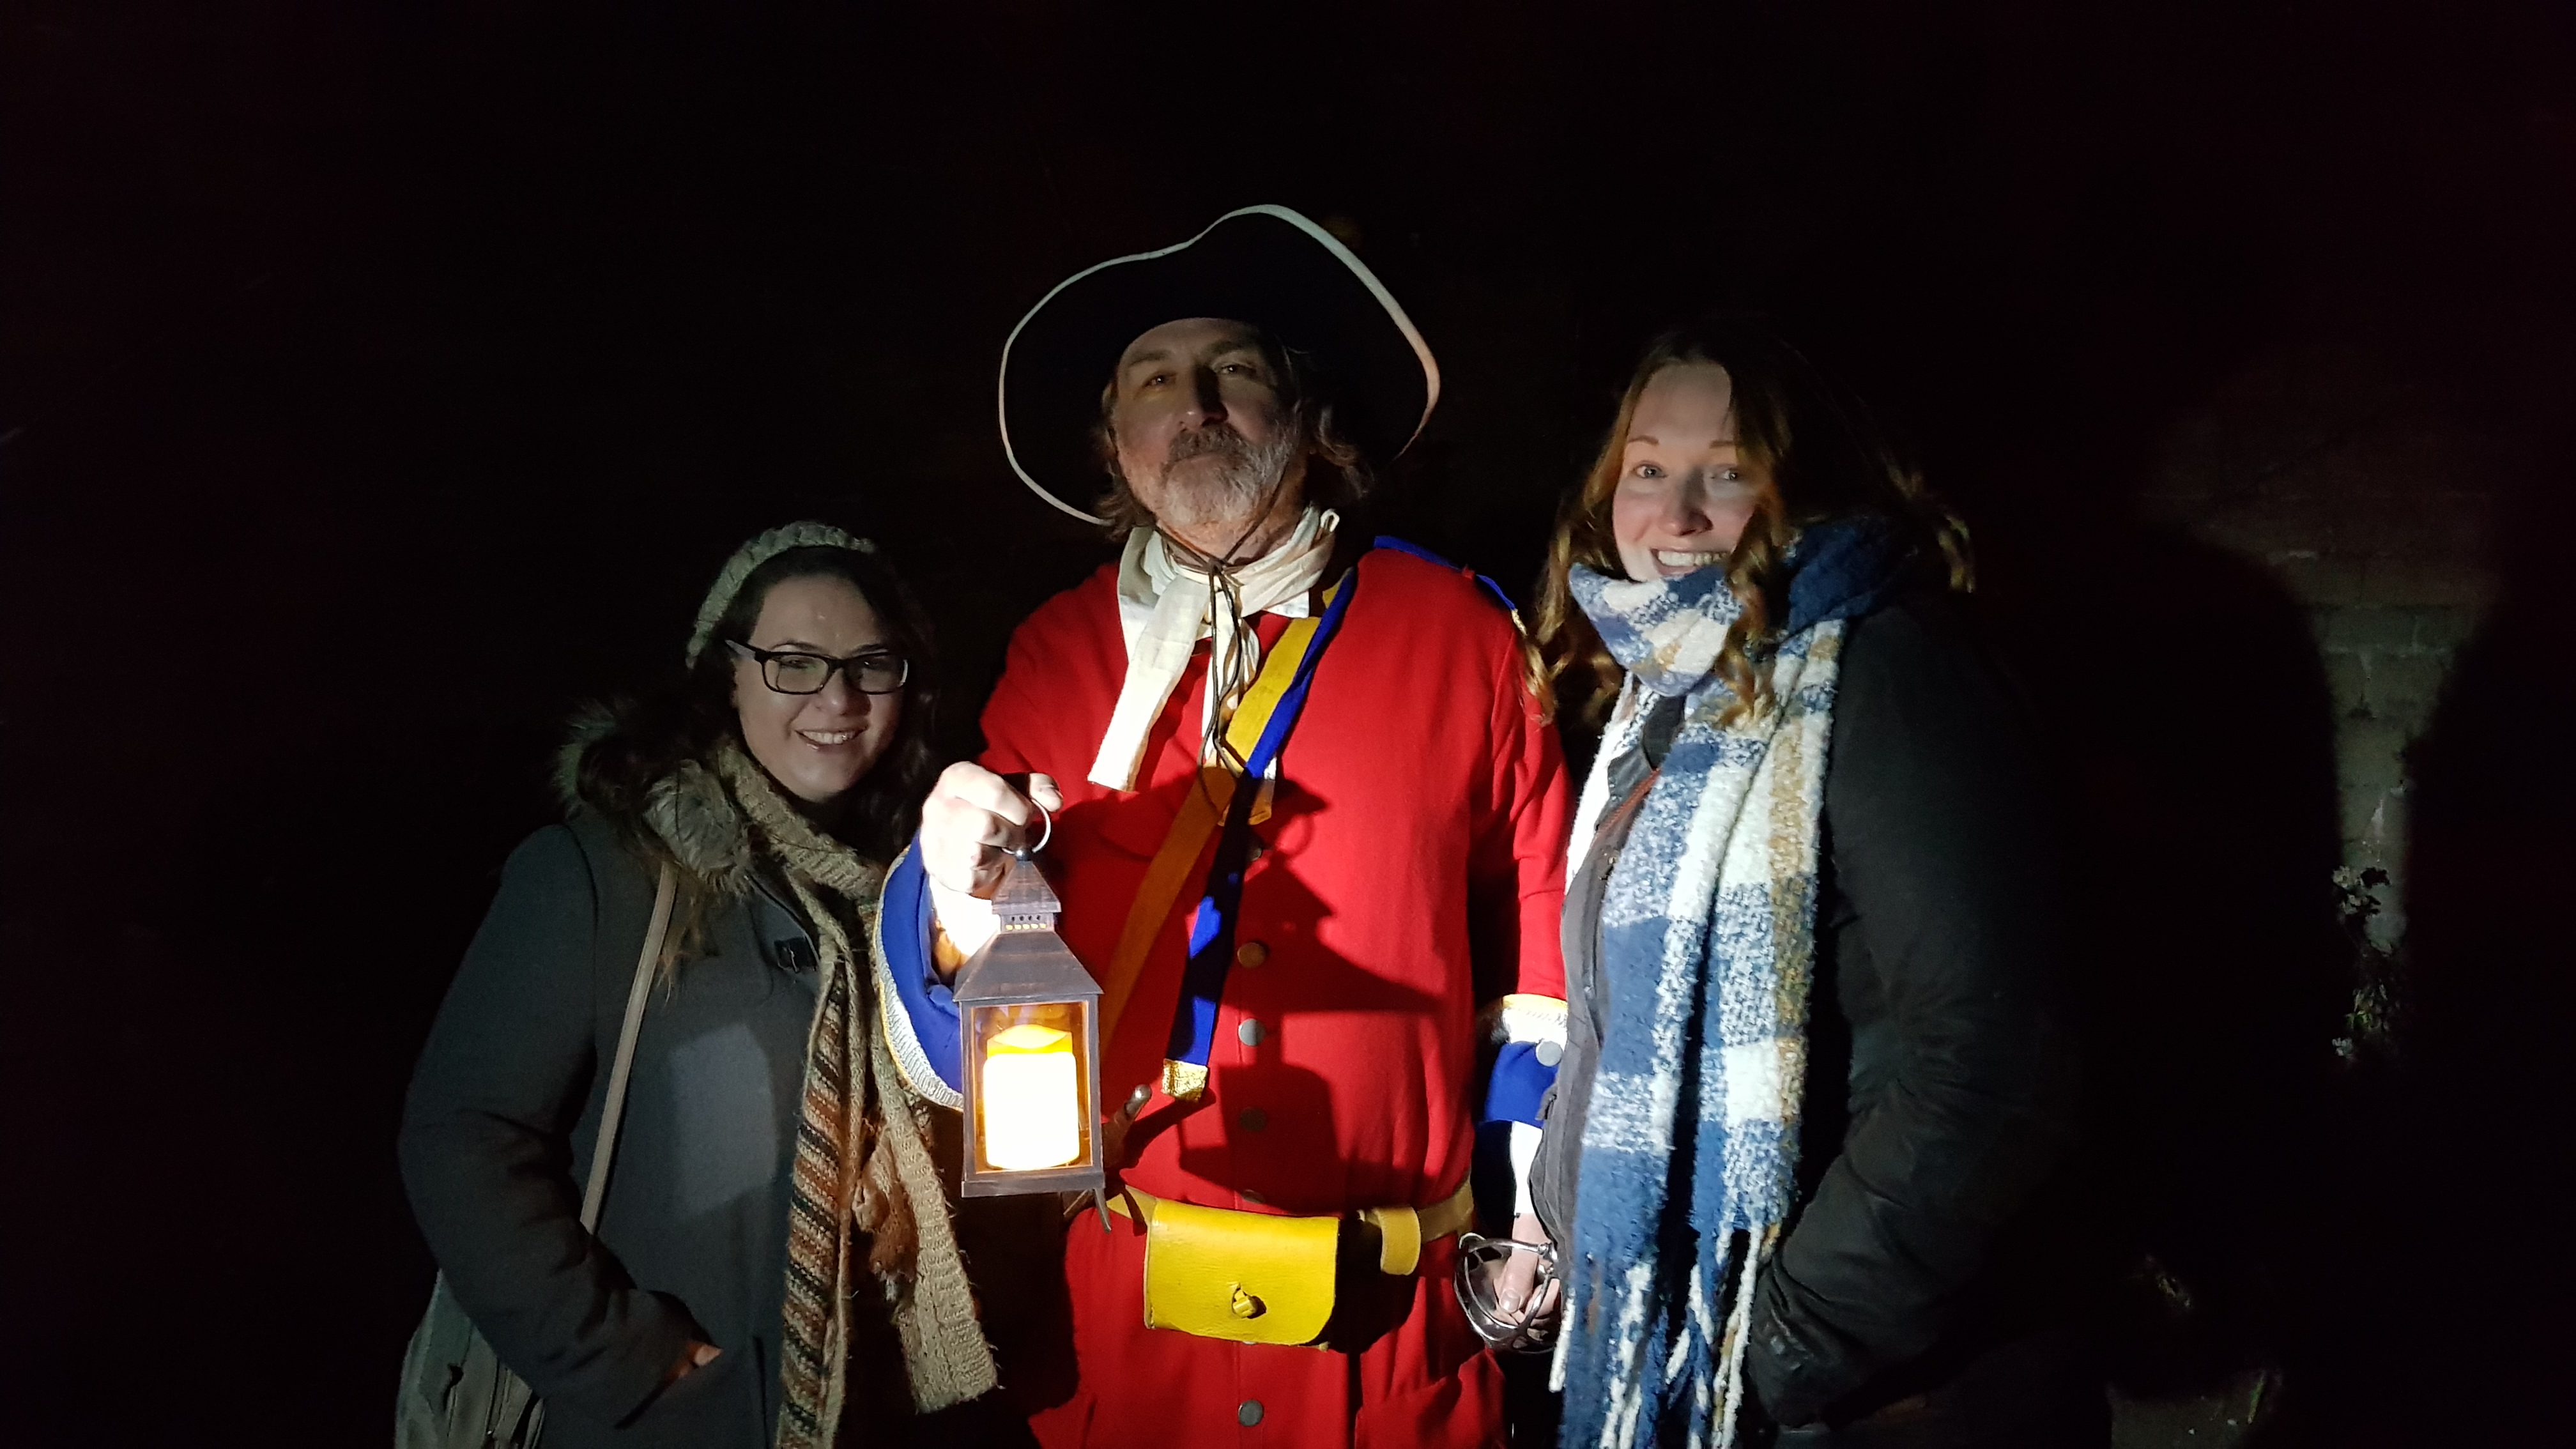 2 young girls wraped up in hats, scarf and coats smiling with an older gentlemen dressed in a red coat and black hat holding an old fashioned lantern. One of the castle guards at the Bolsover Castle Halloween fright night